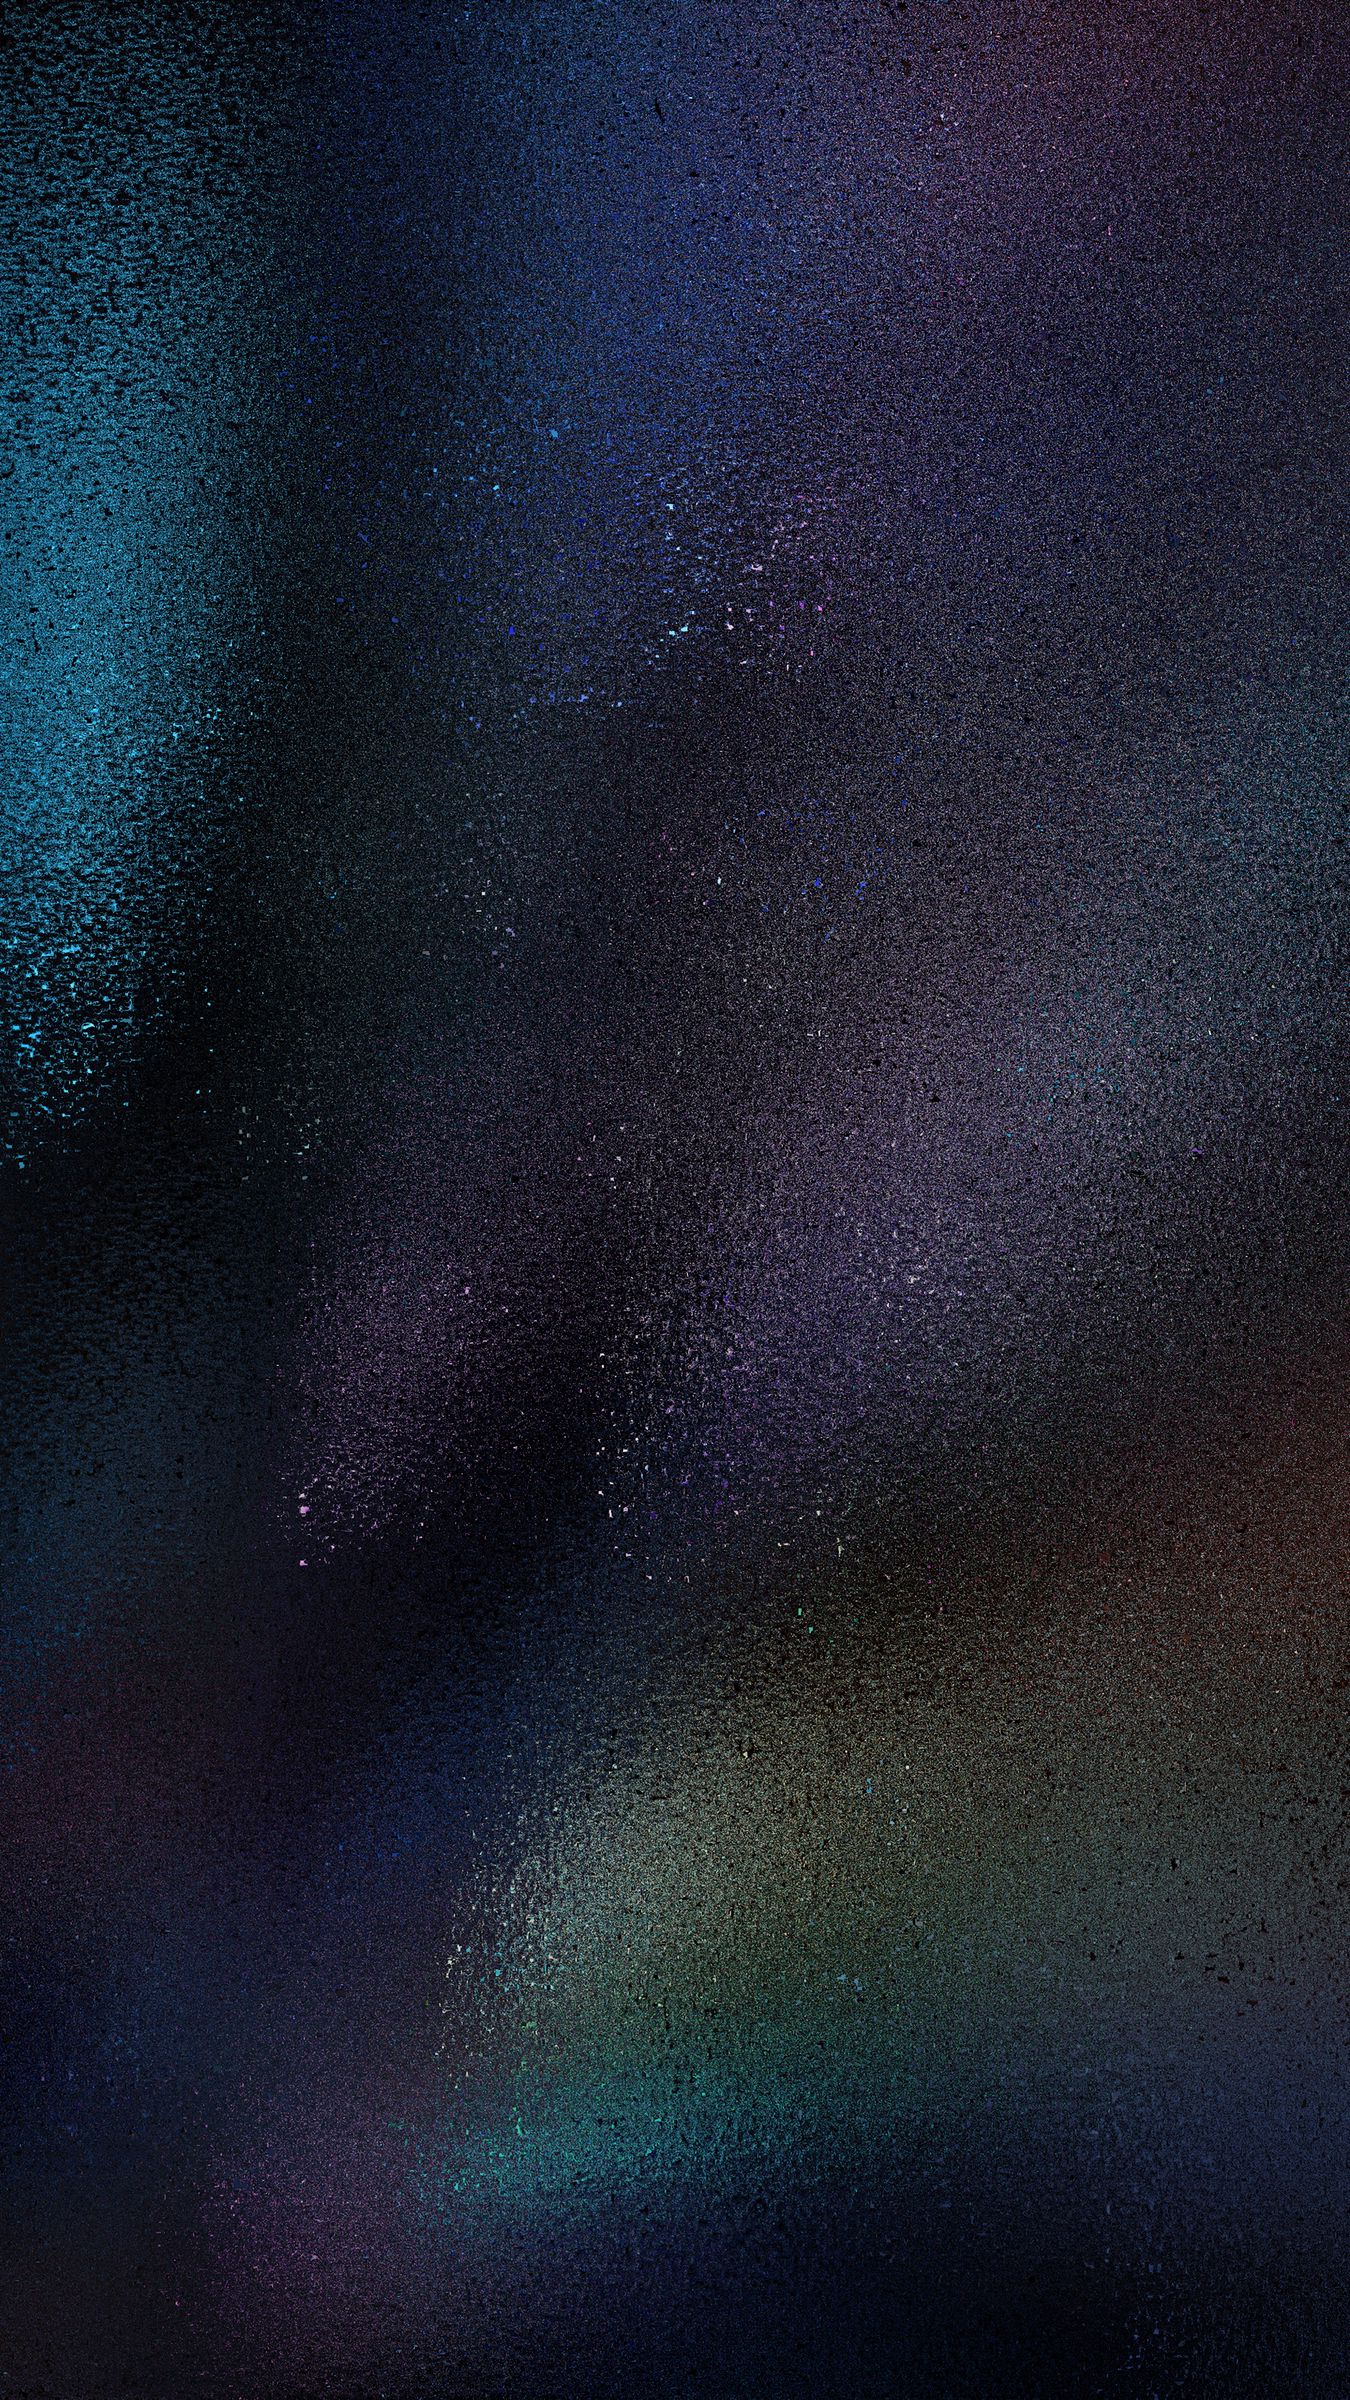 Download wallpaper 1350x2400 blur, texture, misted, dark, iridescent,  shades iphone 8+/7+/6s+/6+ for parallax hd background